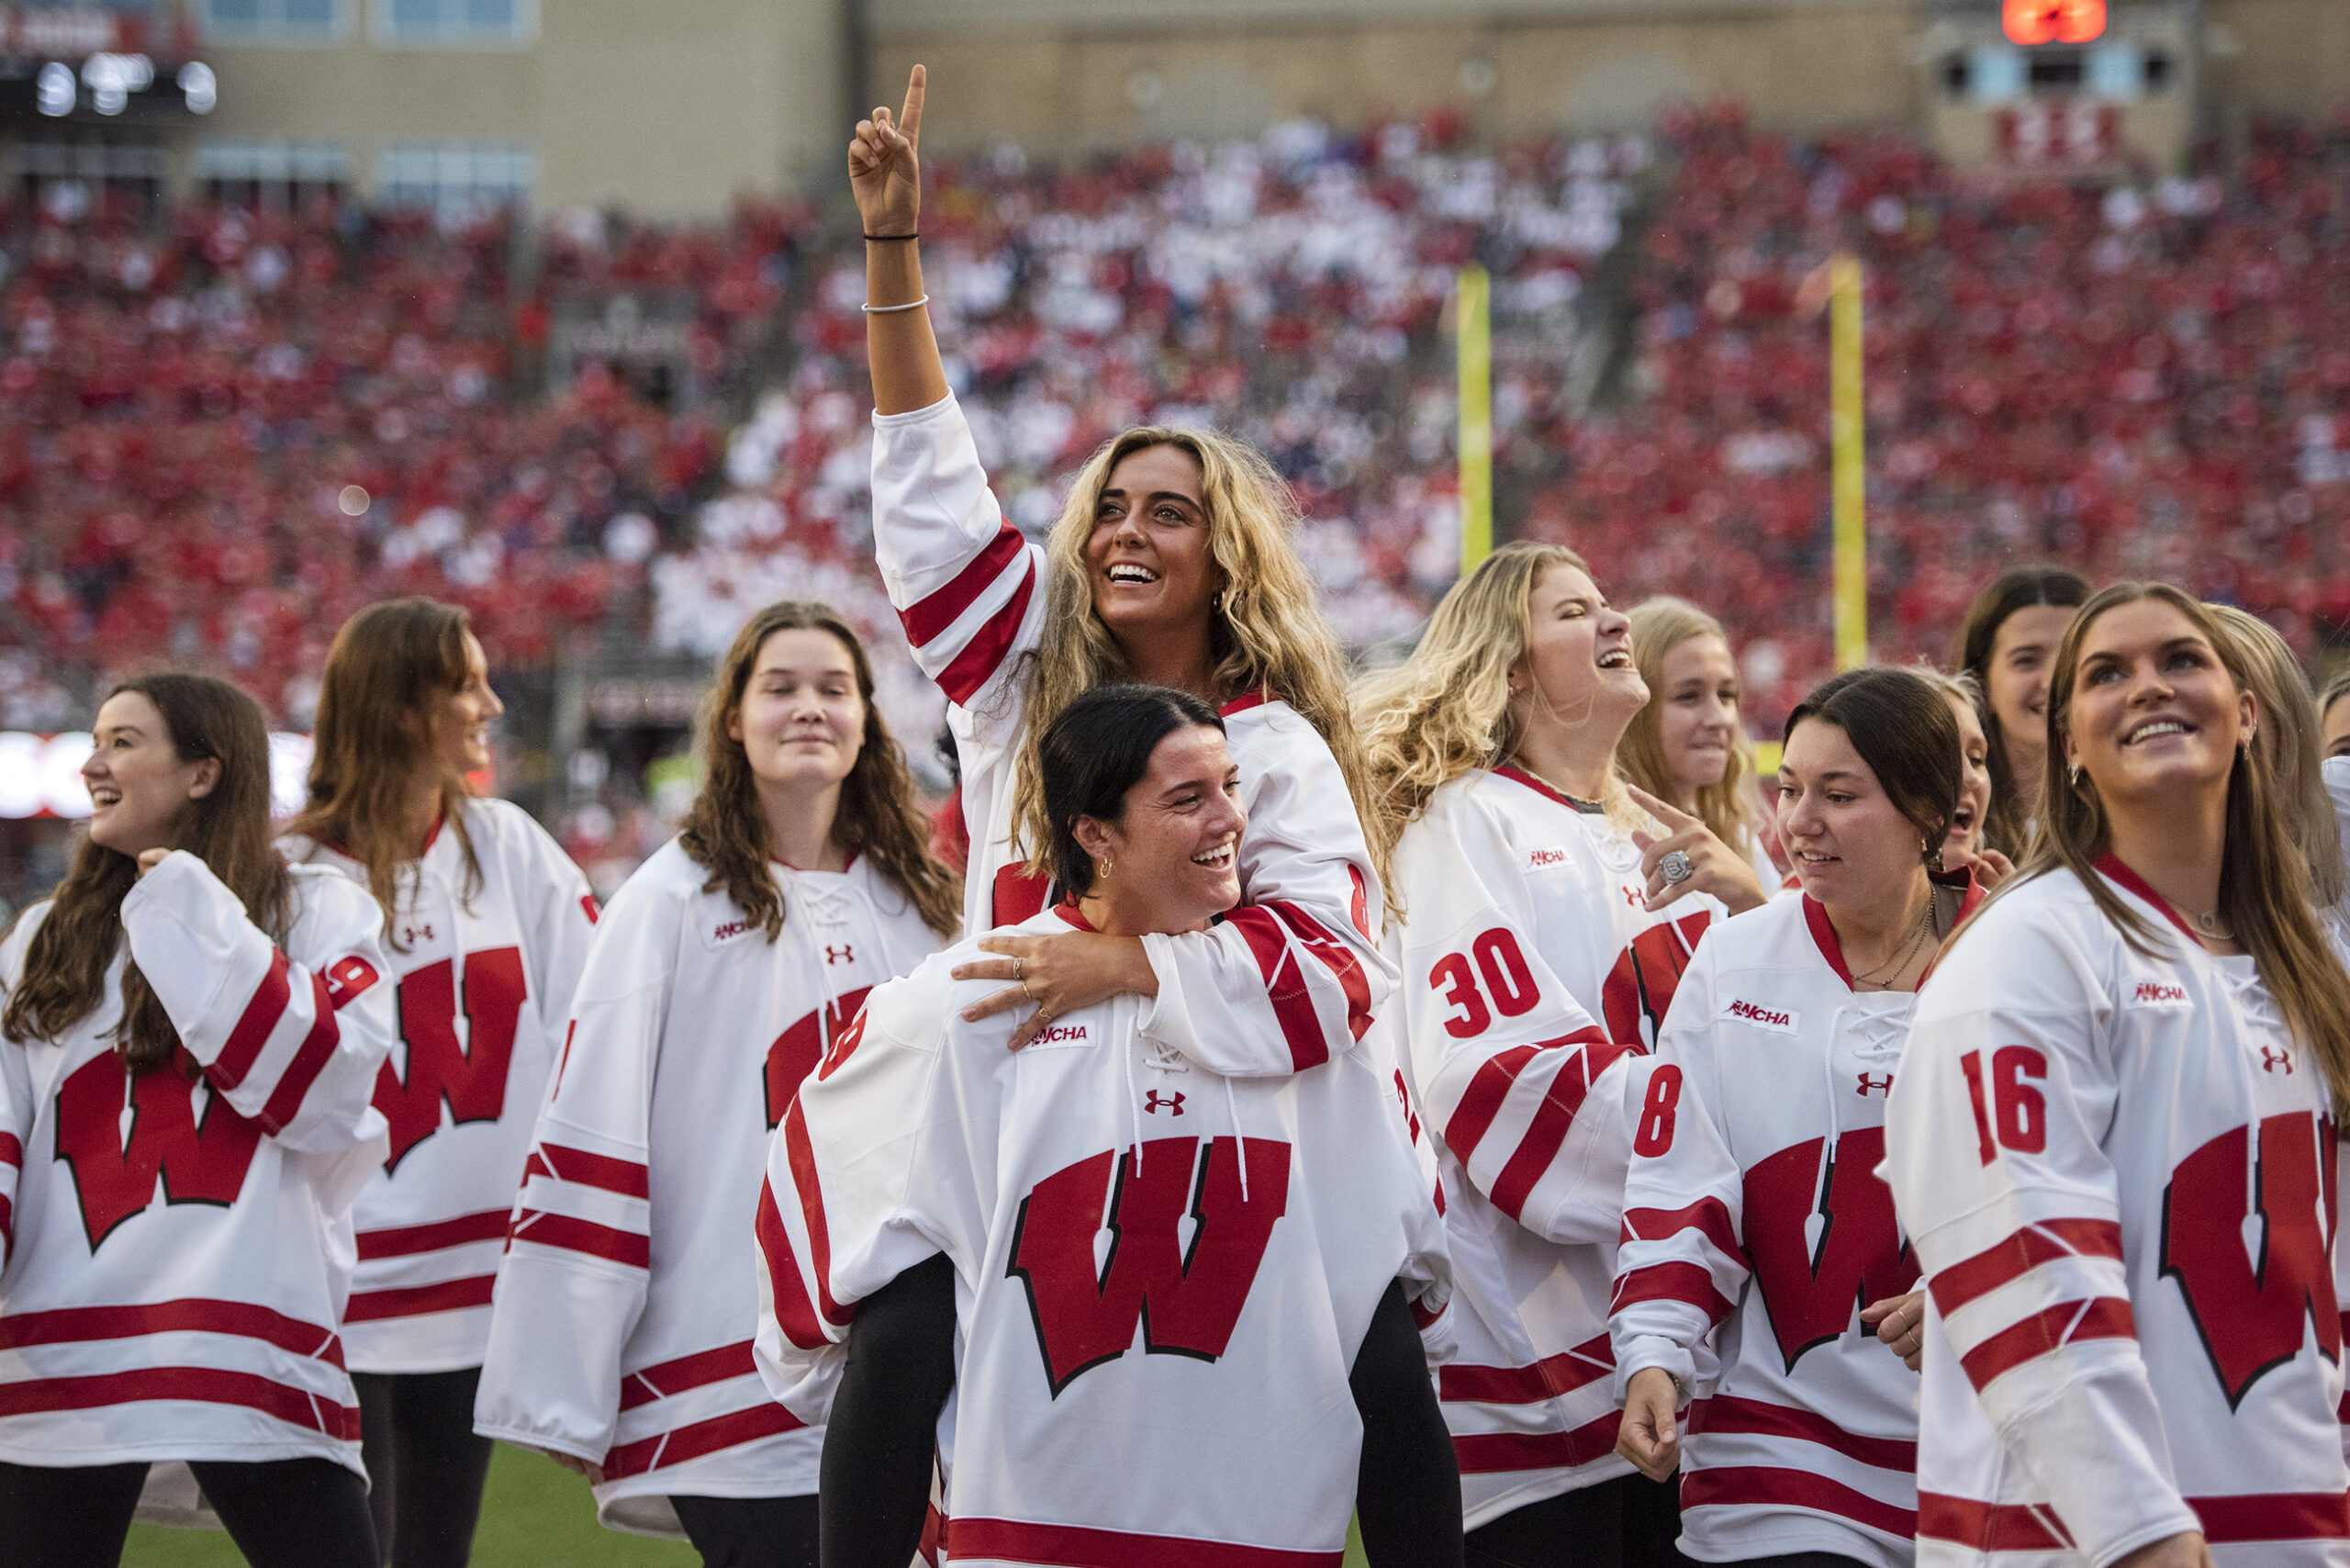 Badgers hockey: Reigning champs prepare for first home games with fans since February 2020